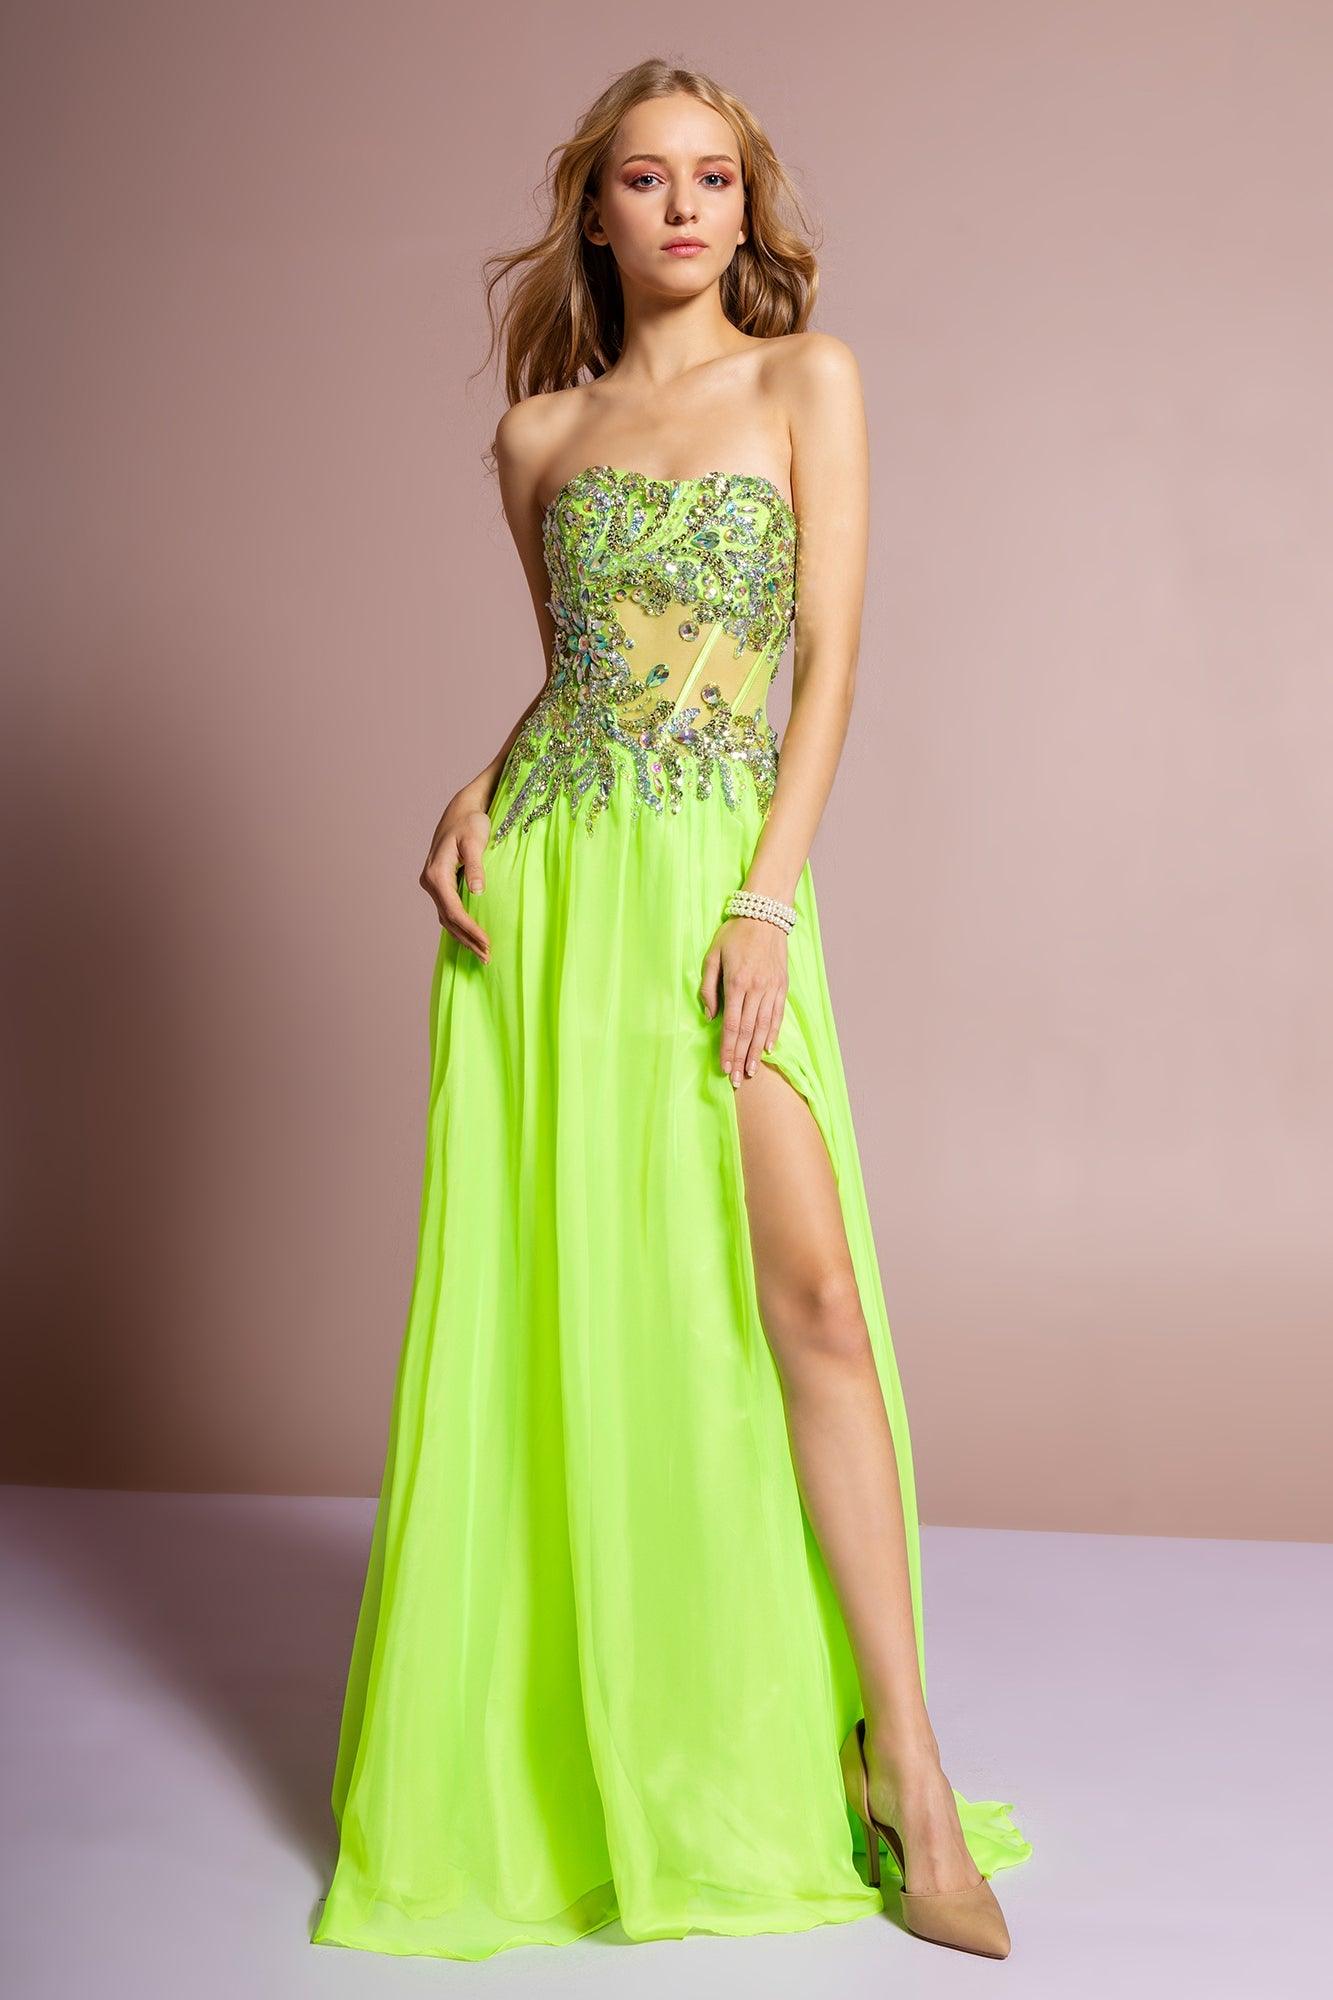 Prom Long Strapless Chiffon Dress Evening Gown - The Dress Outlet Elizabeth K